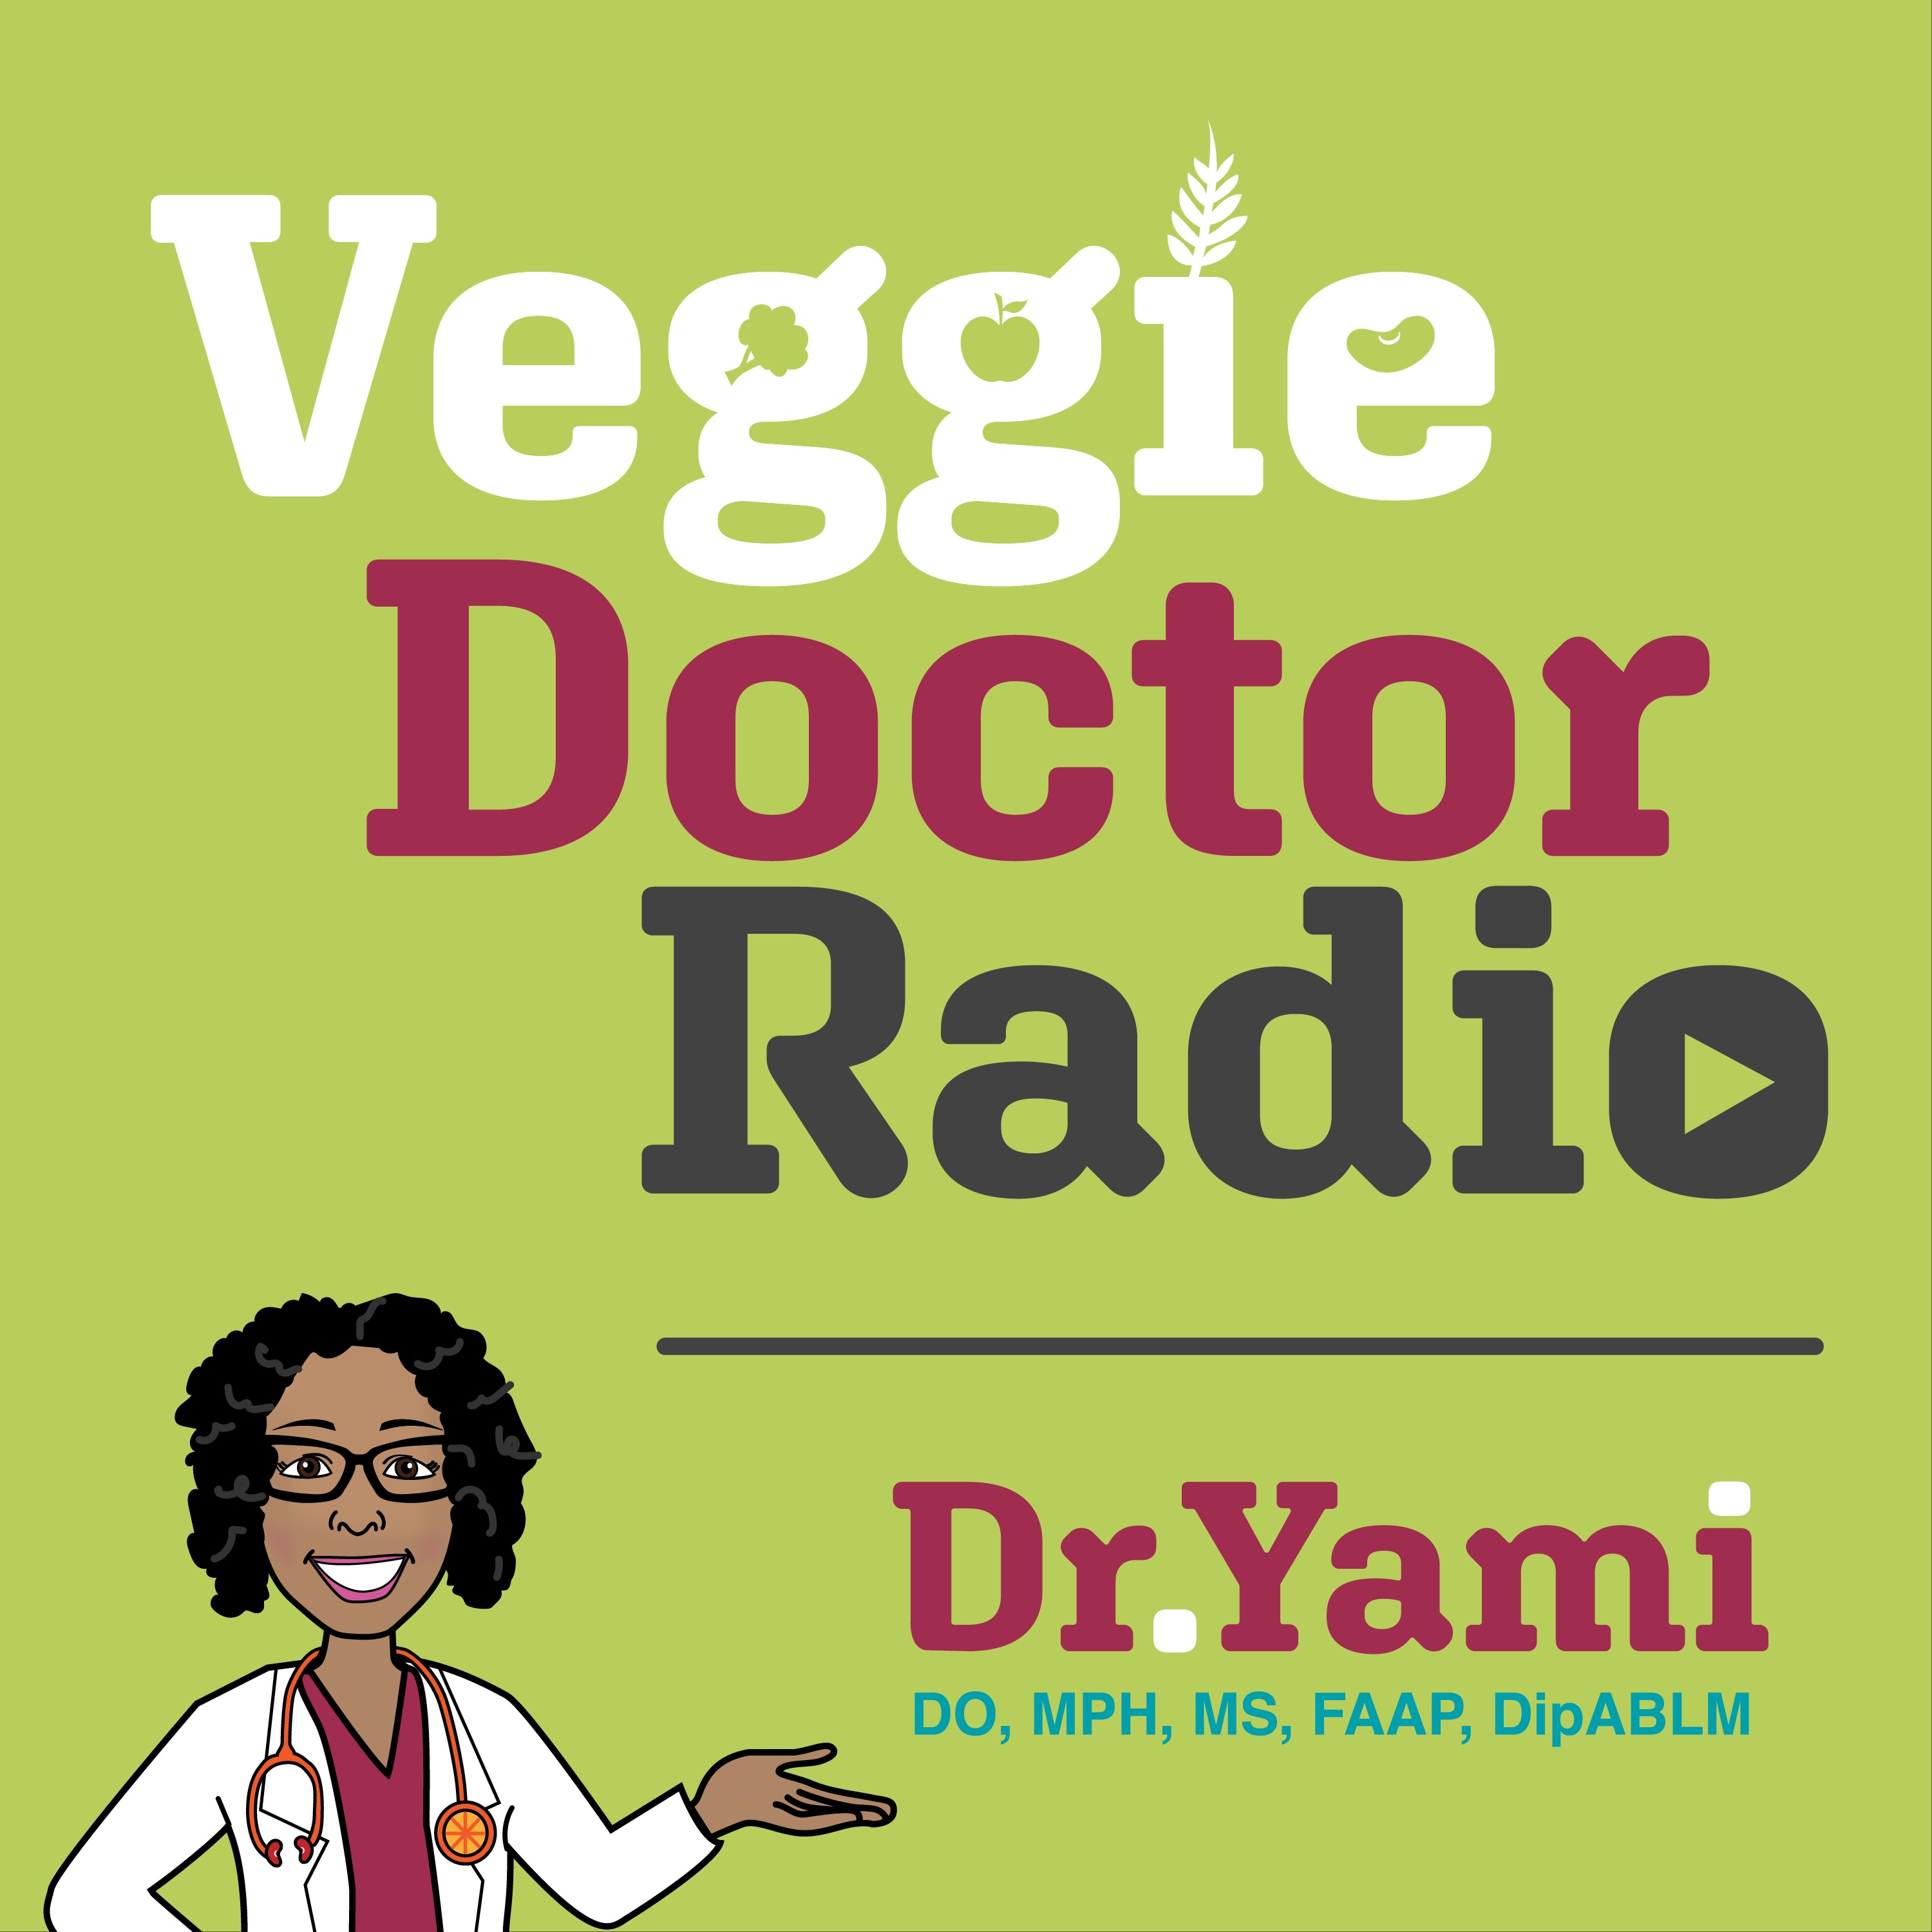 137: Becoming Plant Positive with Aussie Kate Galli (Veggie Doctor Radio)